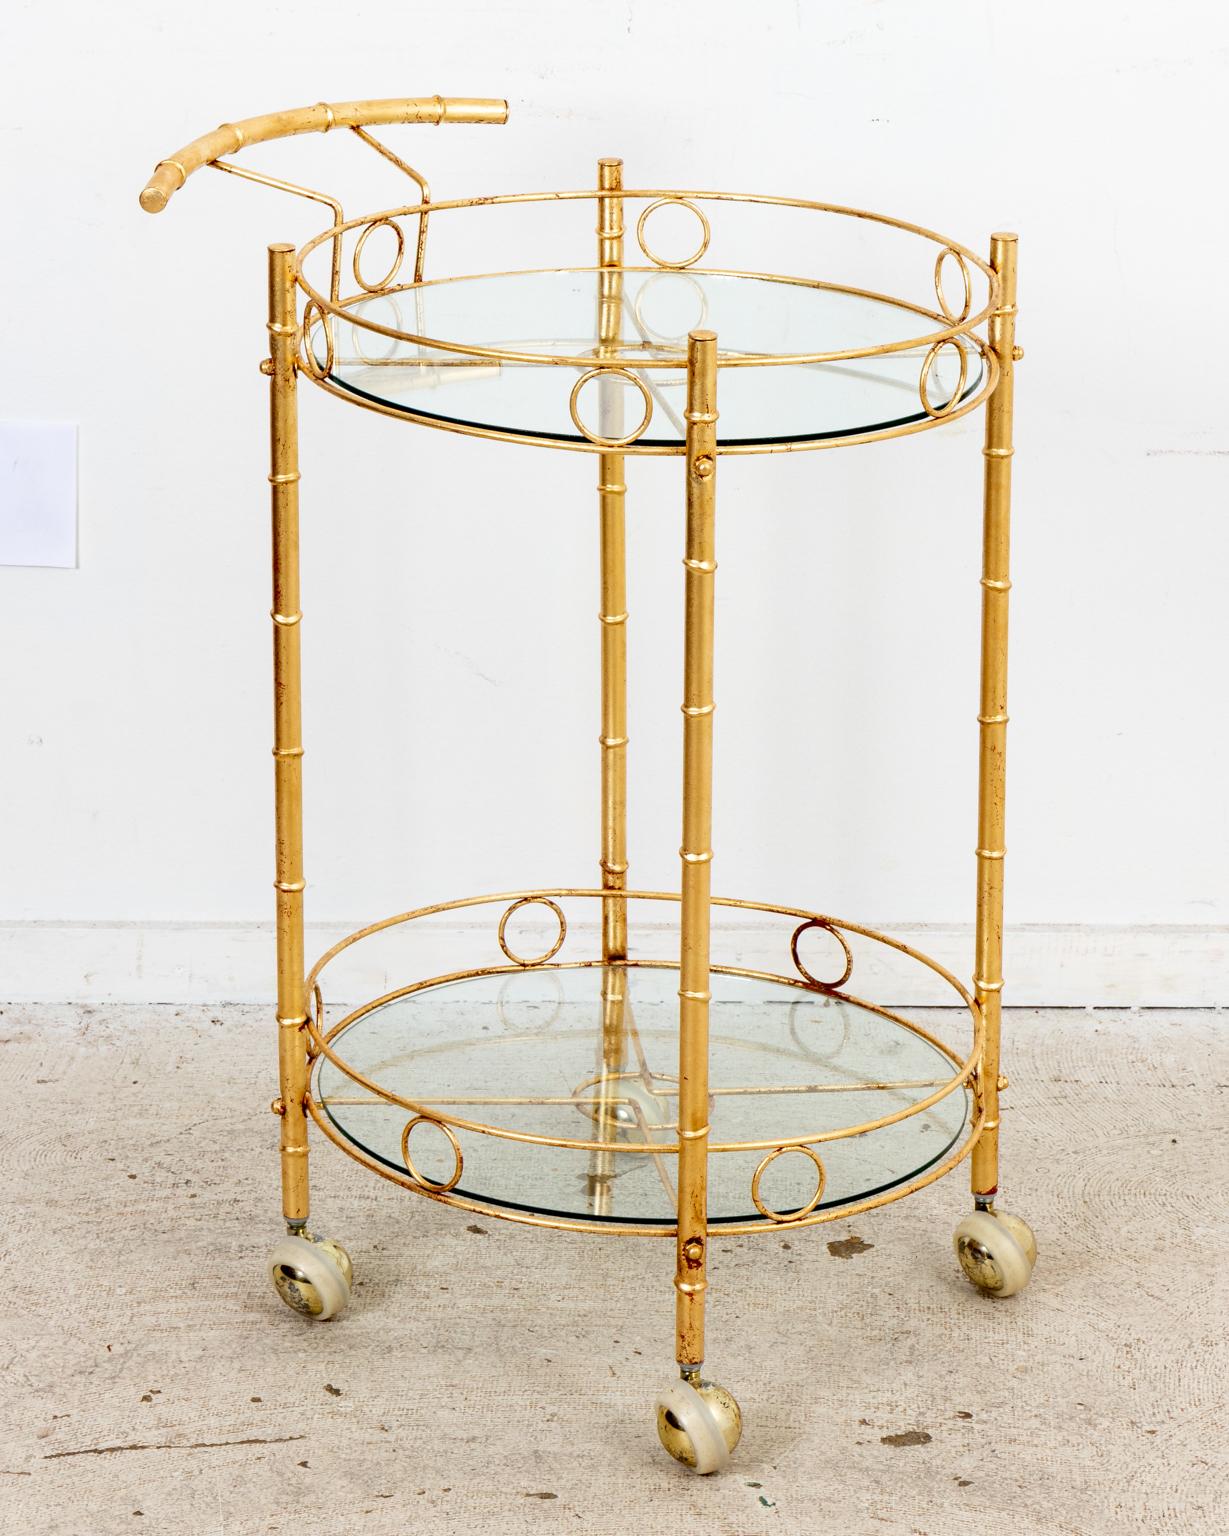 Circa 1960-1970s Hollywood Regency faux bamboo gilt metal round drink cart on ball shaped casters with angled metal detail. The drink cart also features two tiers with round glass inserts and disk trim gallery. Made in the United States. Please note